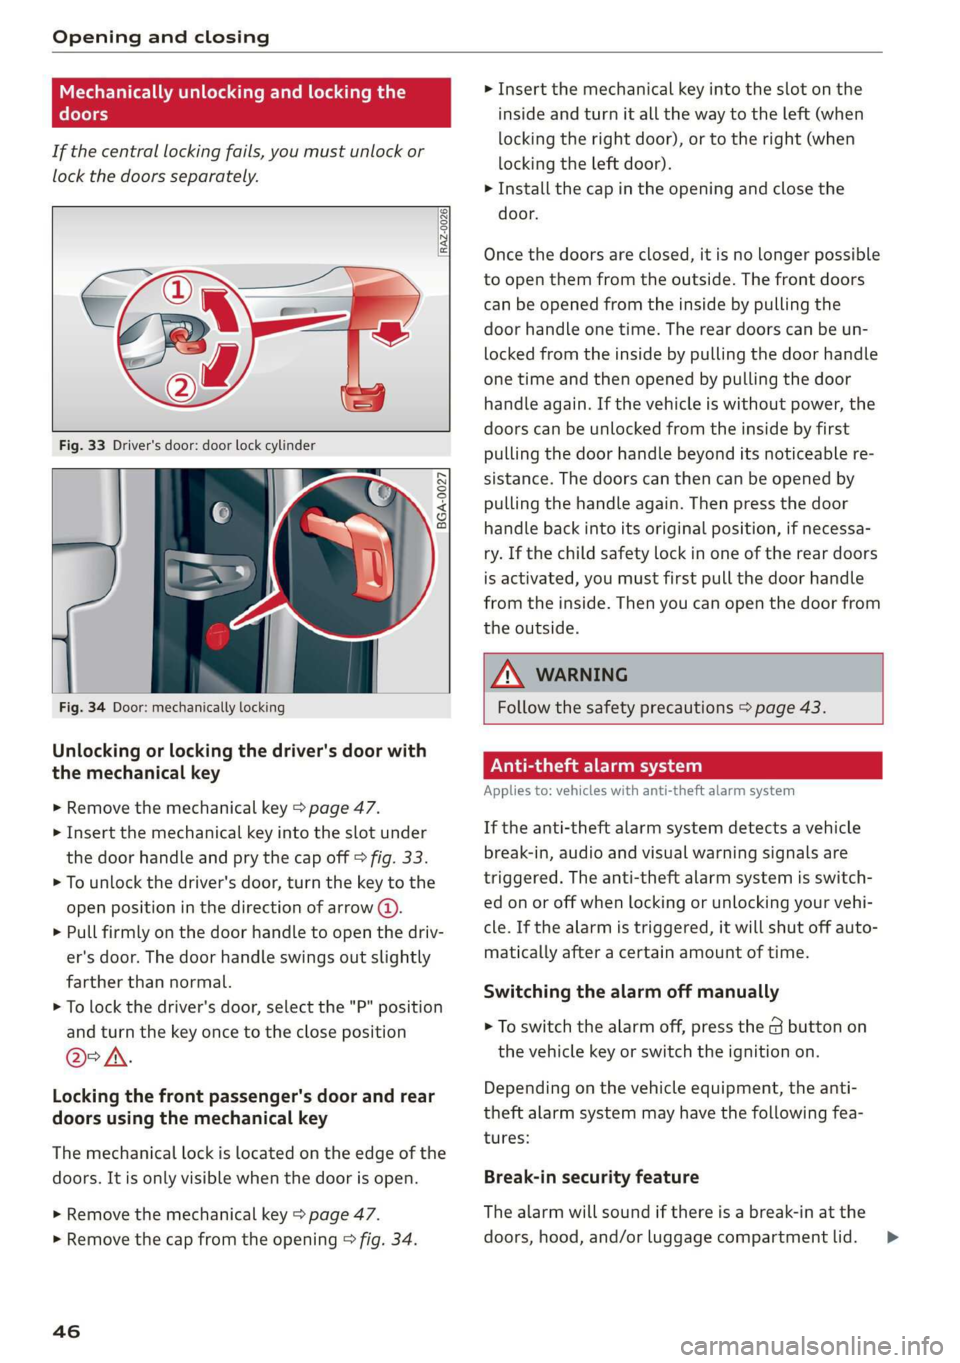 AUDI A8 2020  Owners Manual Opening and closing 
  
Mechanically unlocking and locking the 
(efoto ey 
If the central locking fails, you must unlock or 
lock the doors separately. 
  
  [RAz-0026| 
  
5  a  S  3 
<x 
go a 
    
